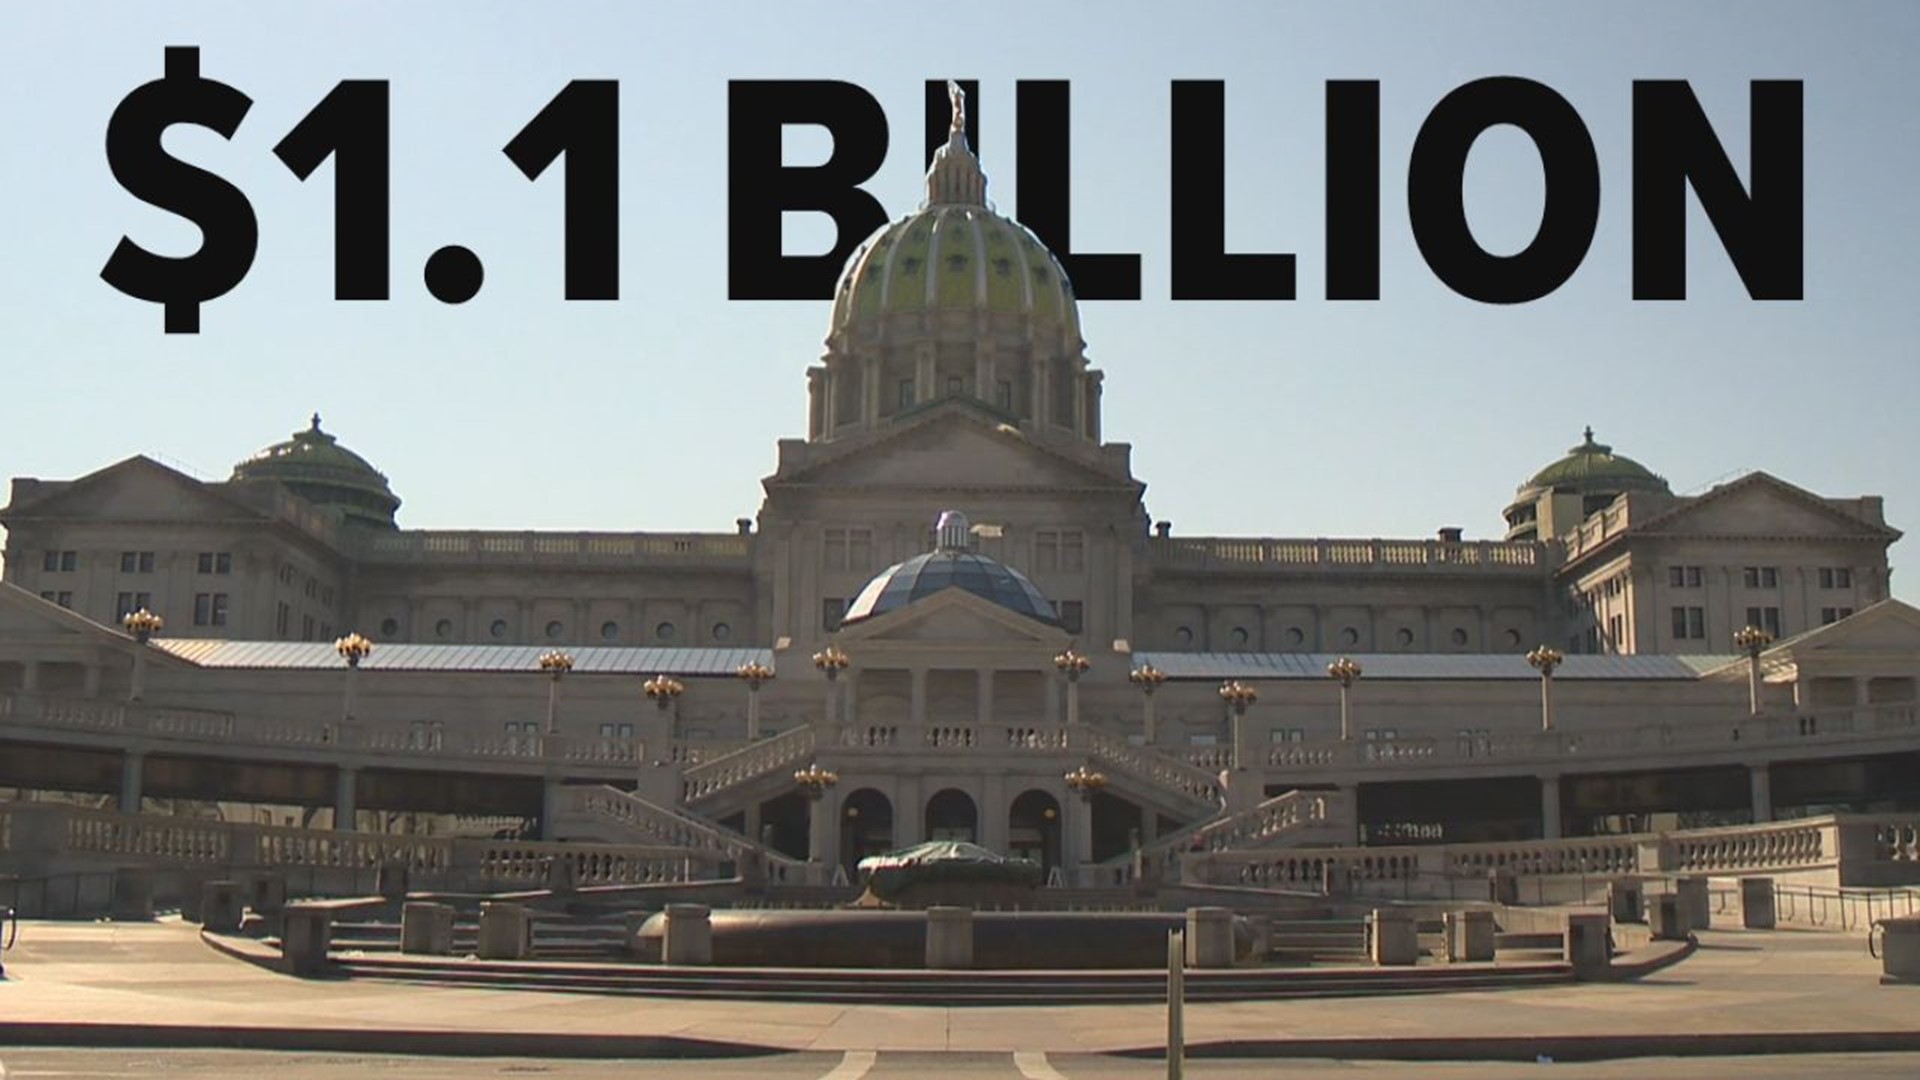 The Pennsylvania House of Representatives passed bills to tie up the delayed budget, though its prospects of passing in the Senate are unclear.